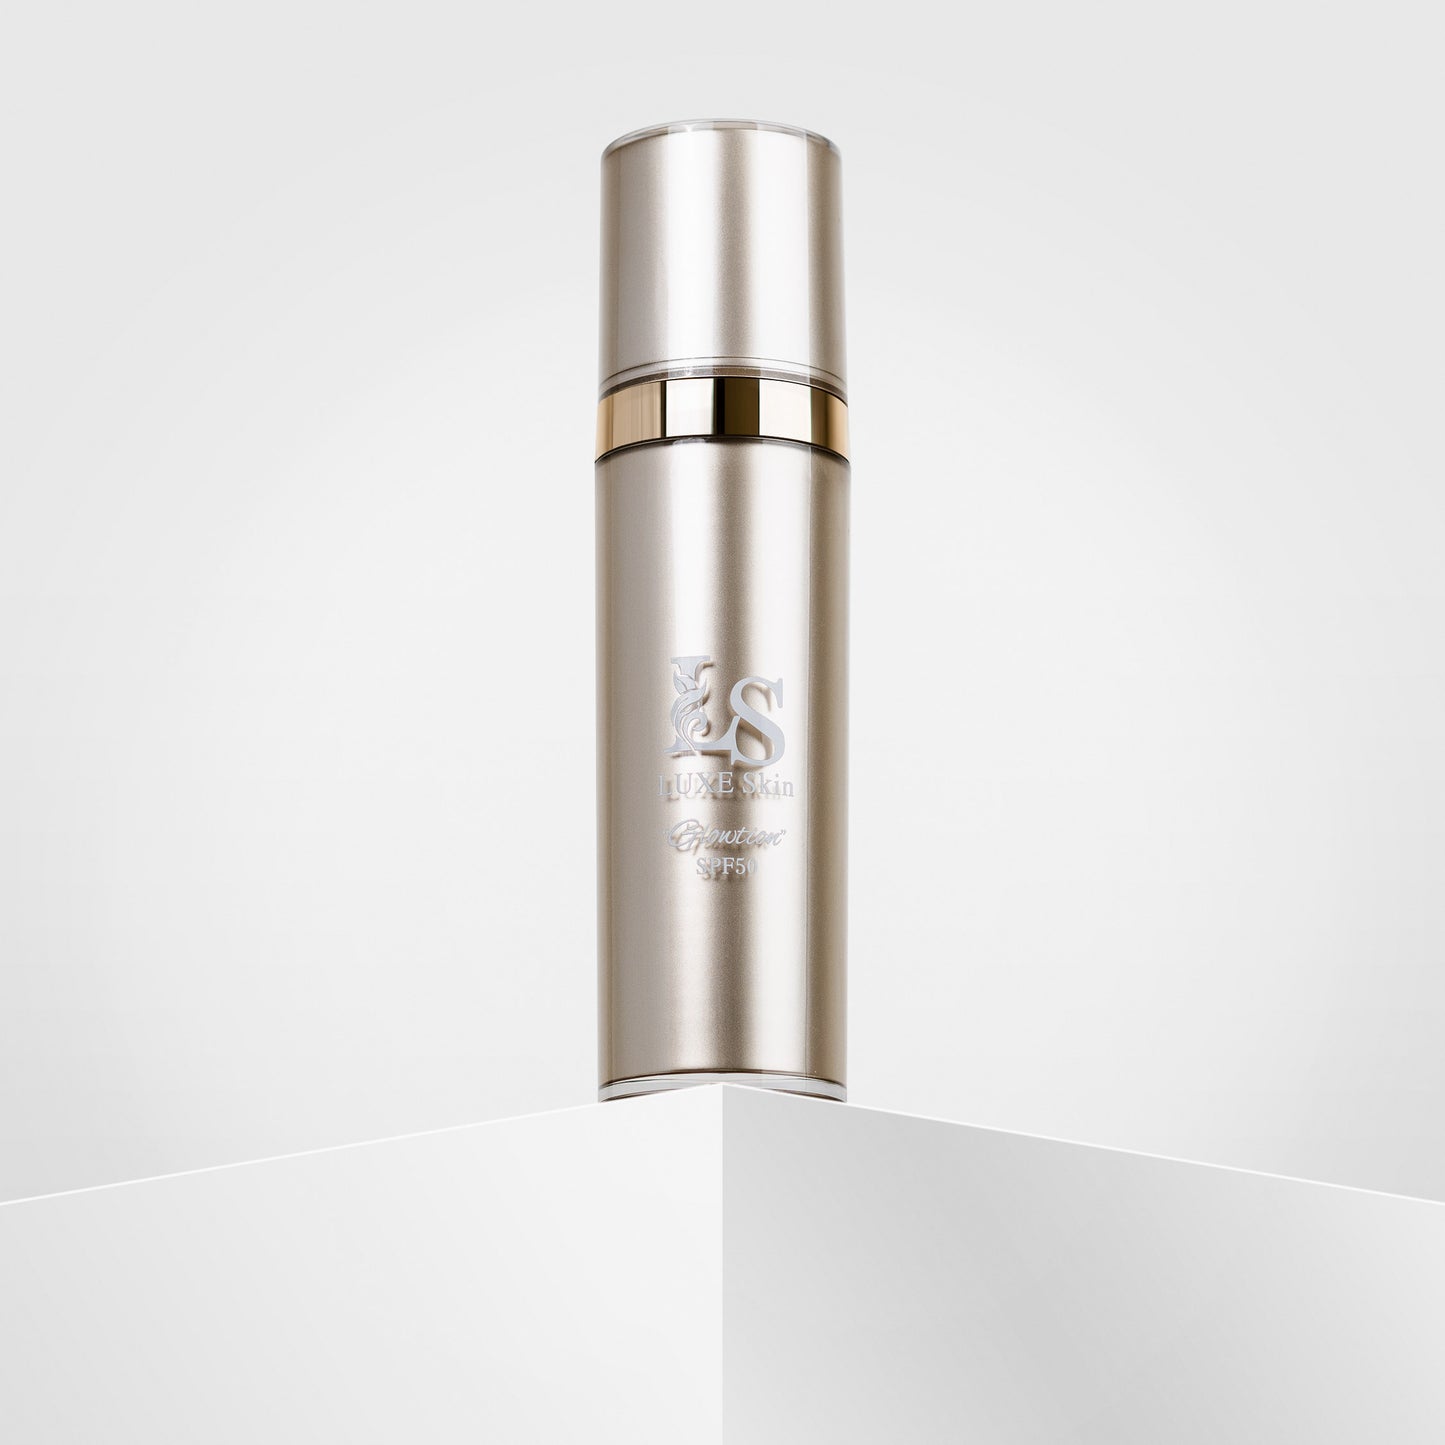 Luxe Skin GLOWTION with SPF50 120ml